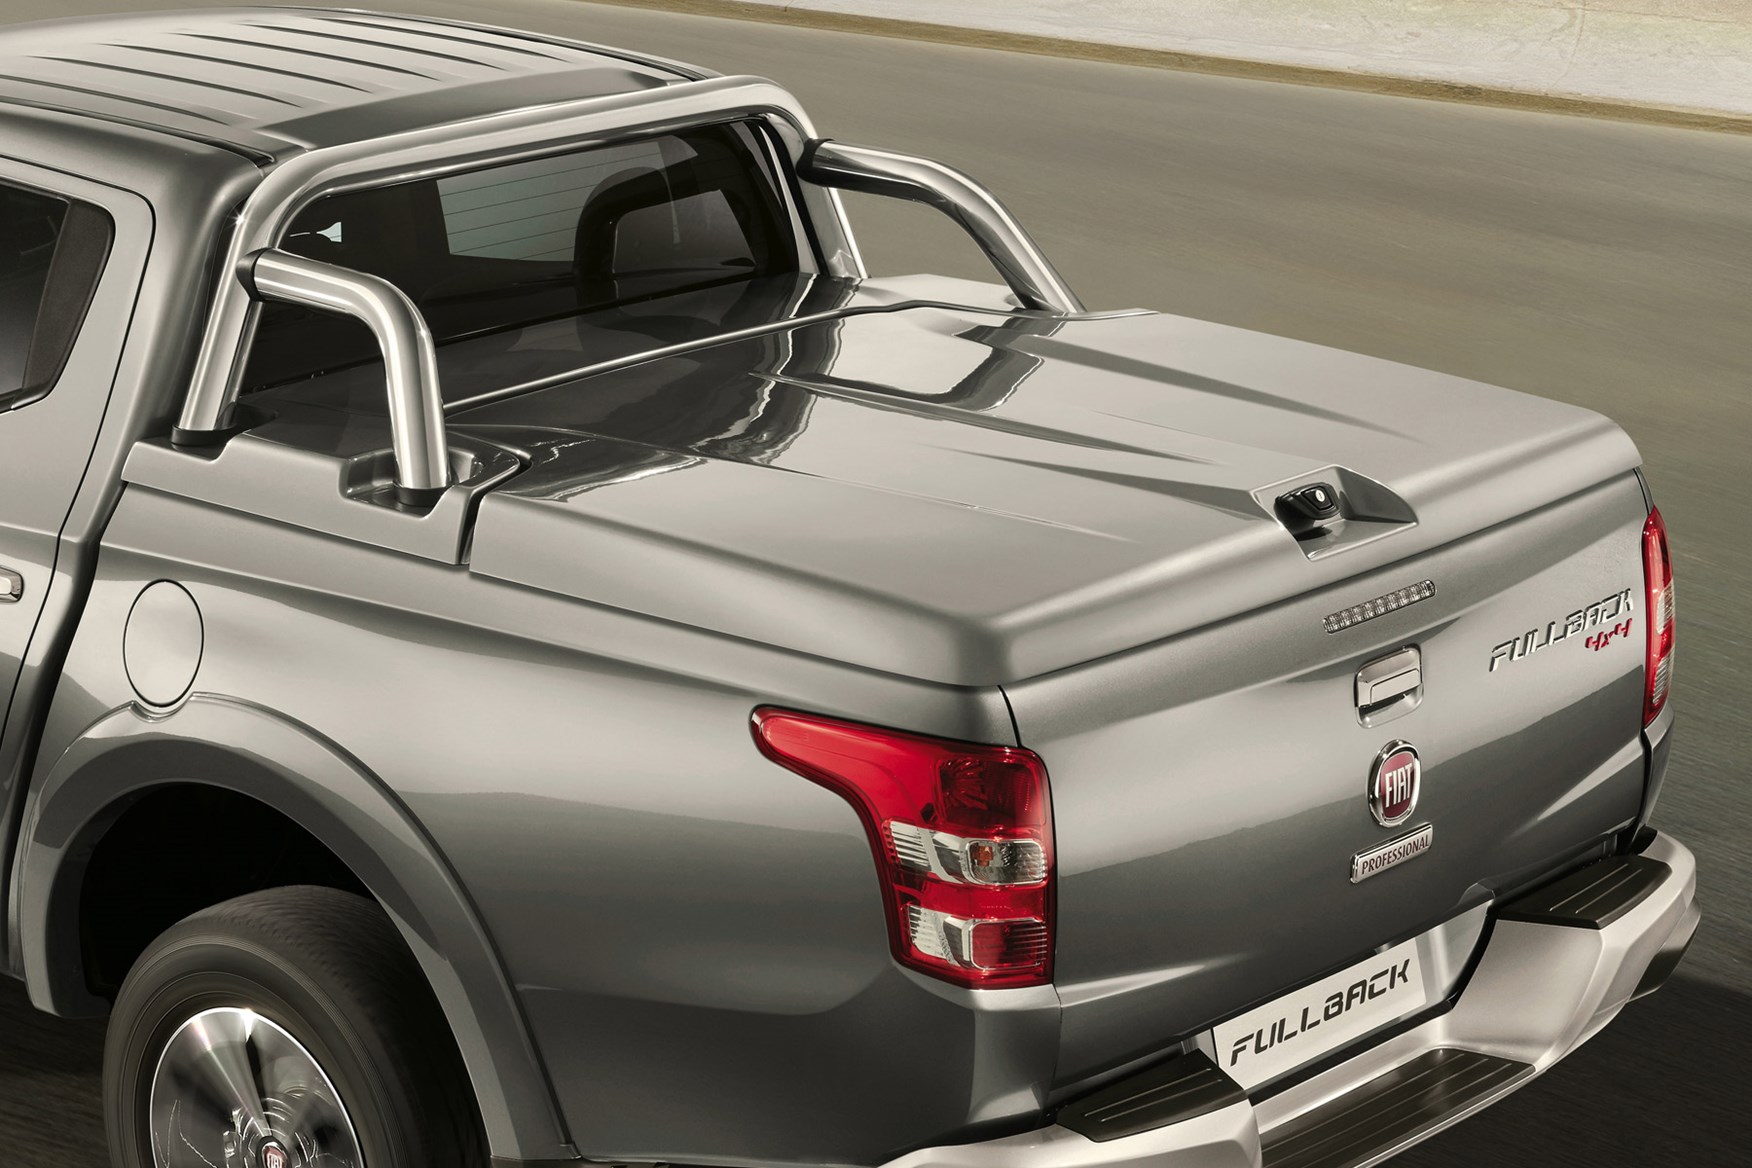 Fiat Fullback full review on Parkers Vans - load area cover